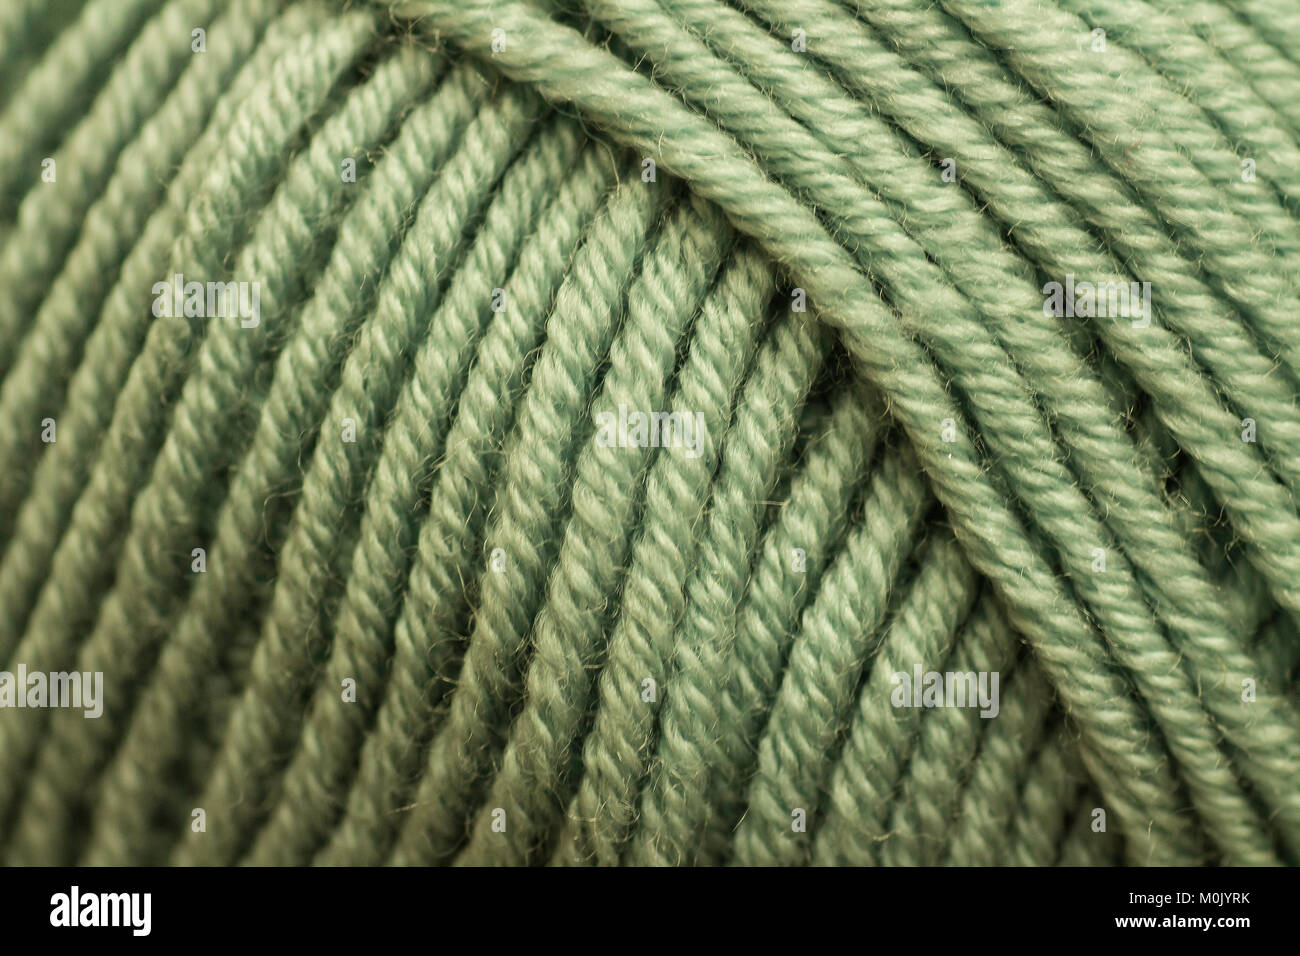 Macro photograph of a green ball of wool Stock Photo